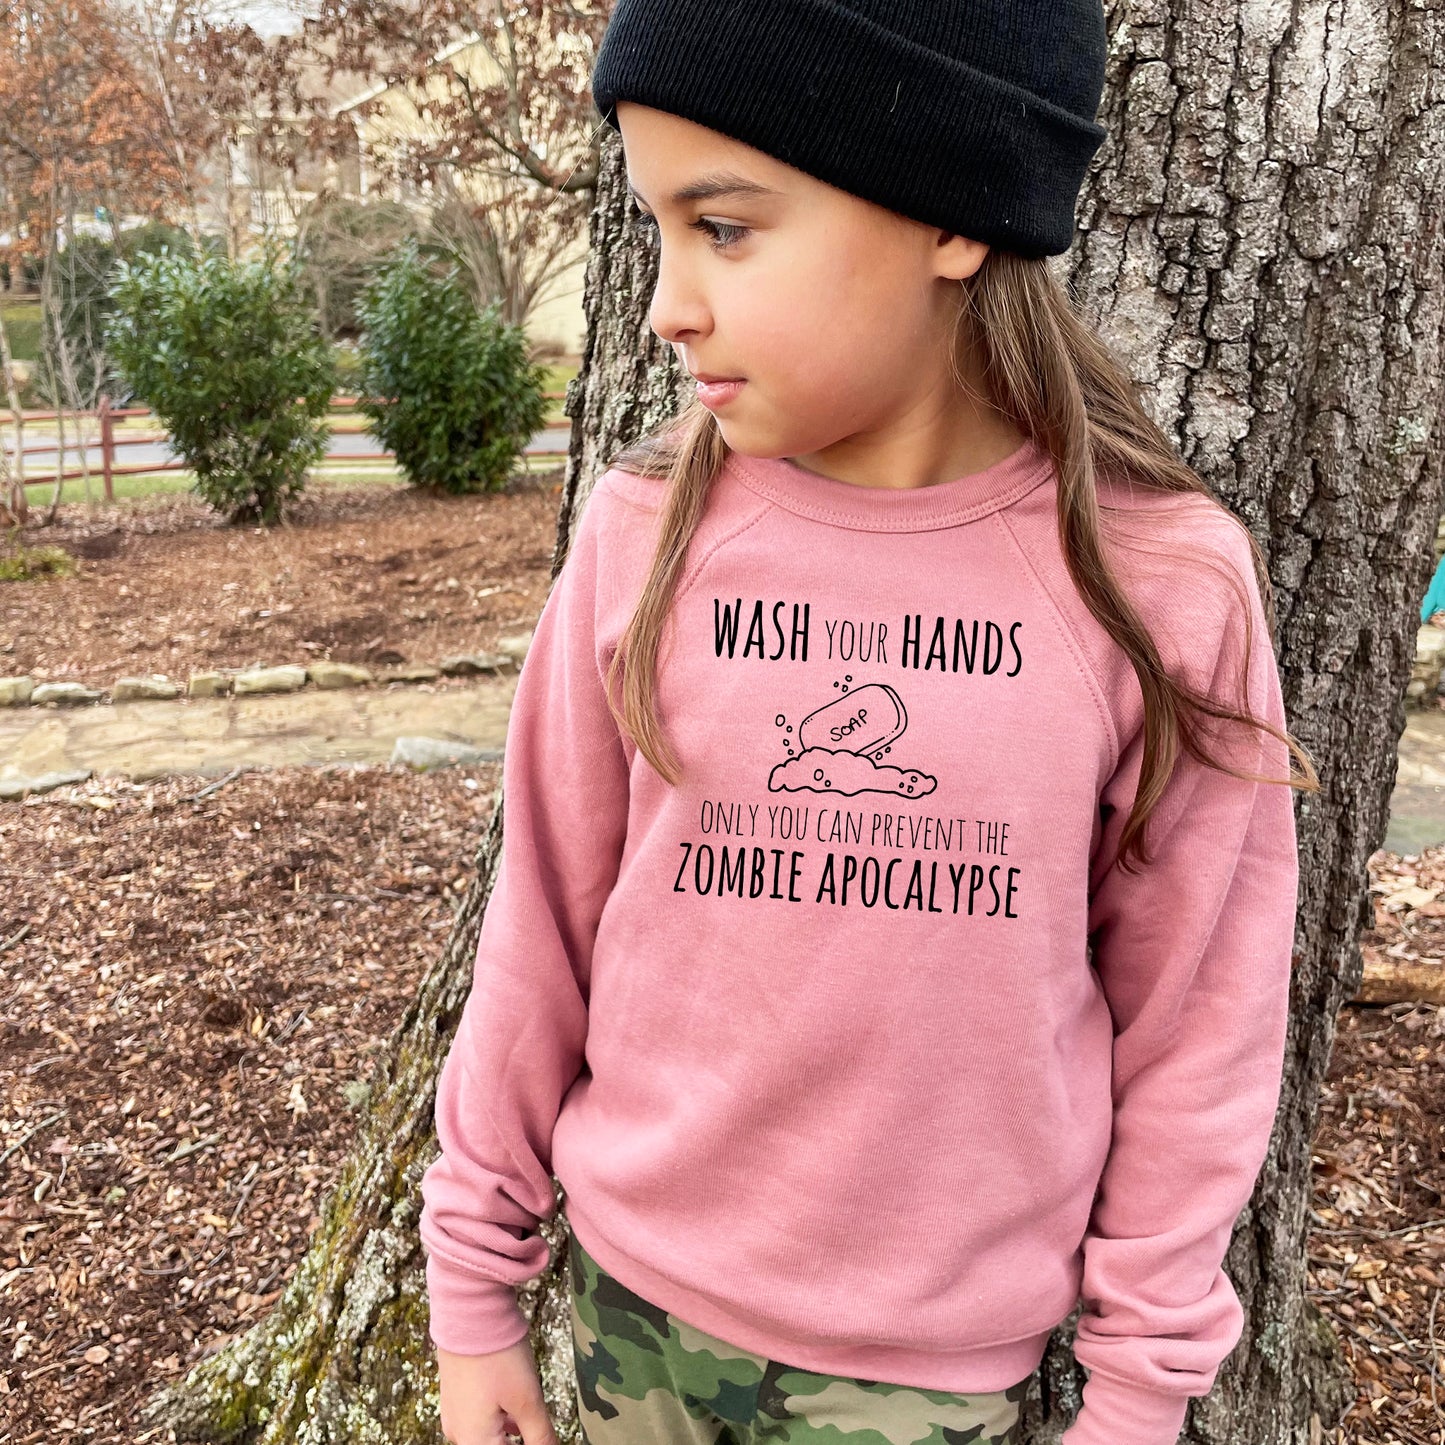 Wash Your Hands Only You Can Prevent The Zombie Apocalypse - Kid's Sweatshirt - Heather Gray or Mauve